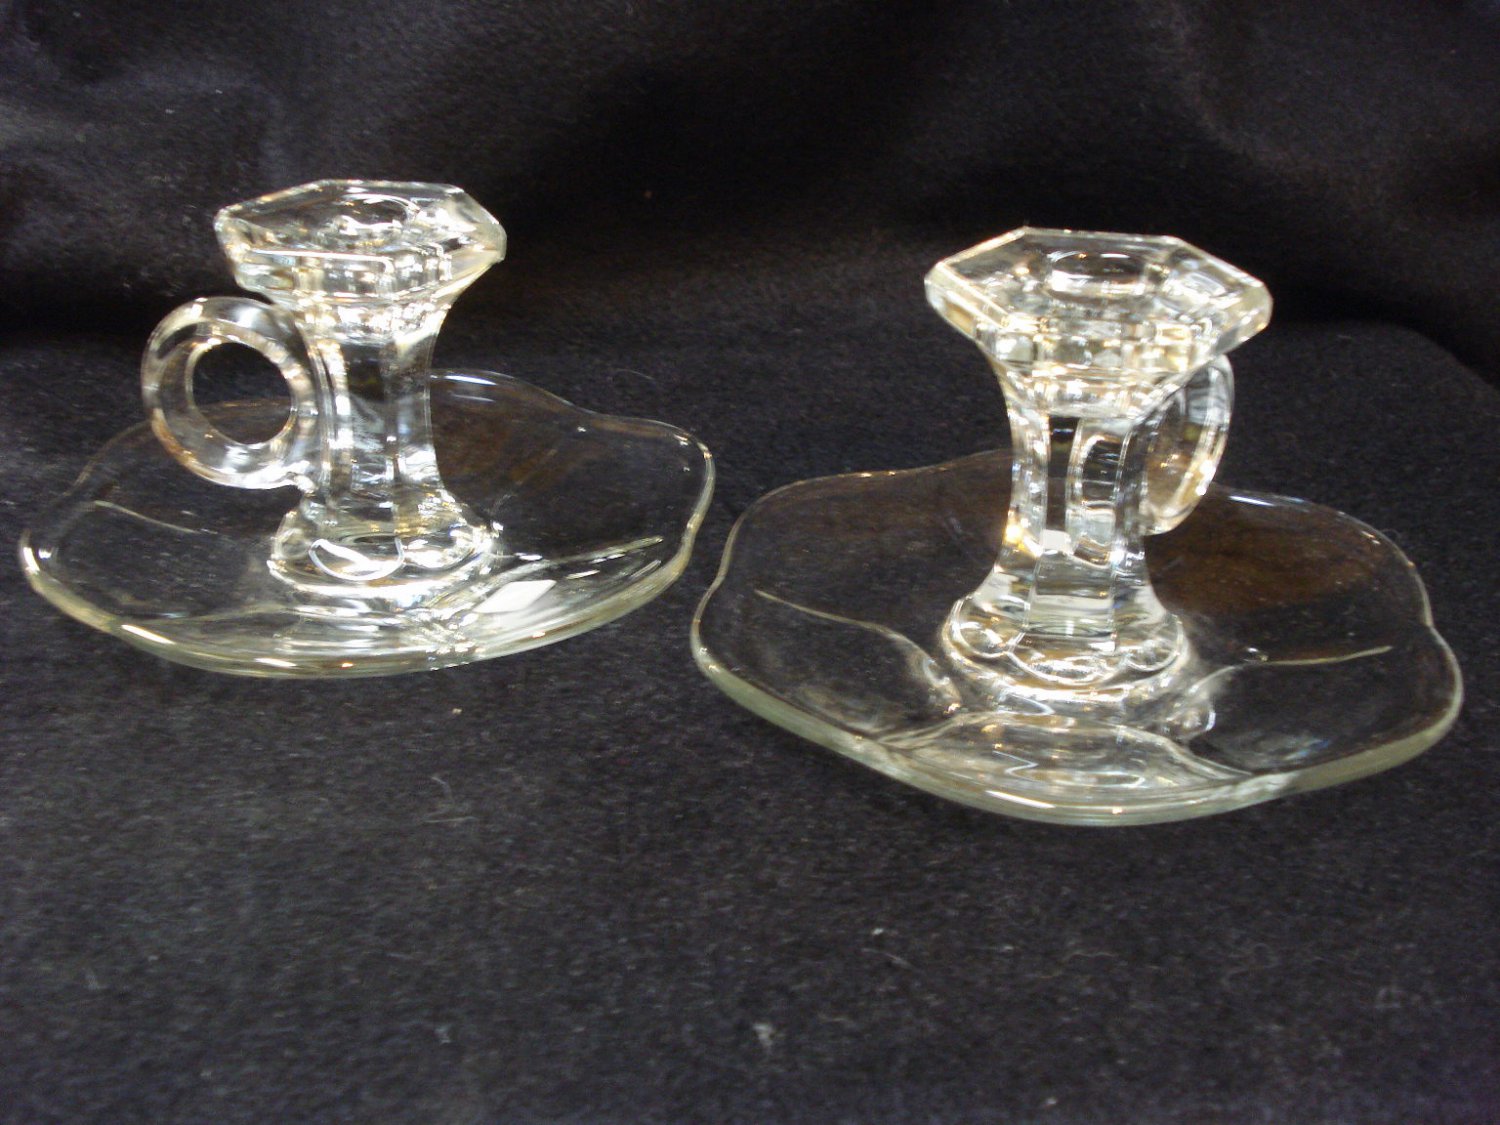 New Martinsville Saucer Handled Candle Sticks, Pair, 1920s crystal, made in USA